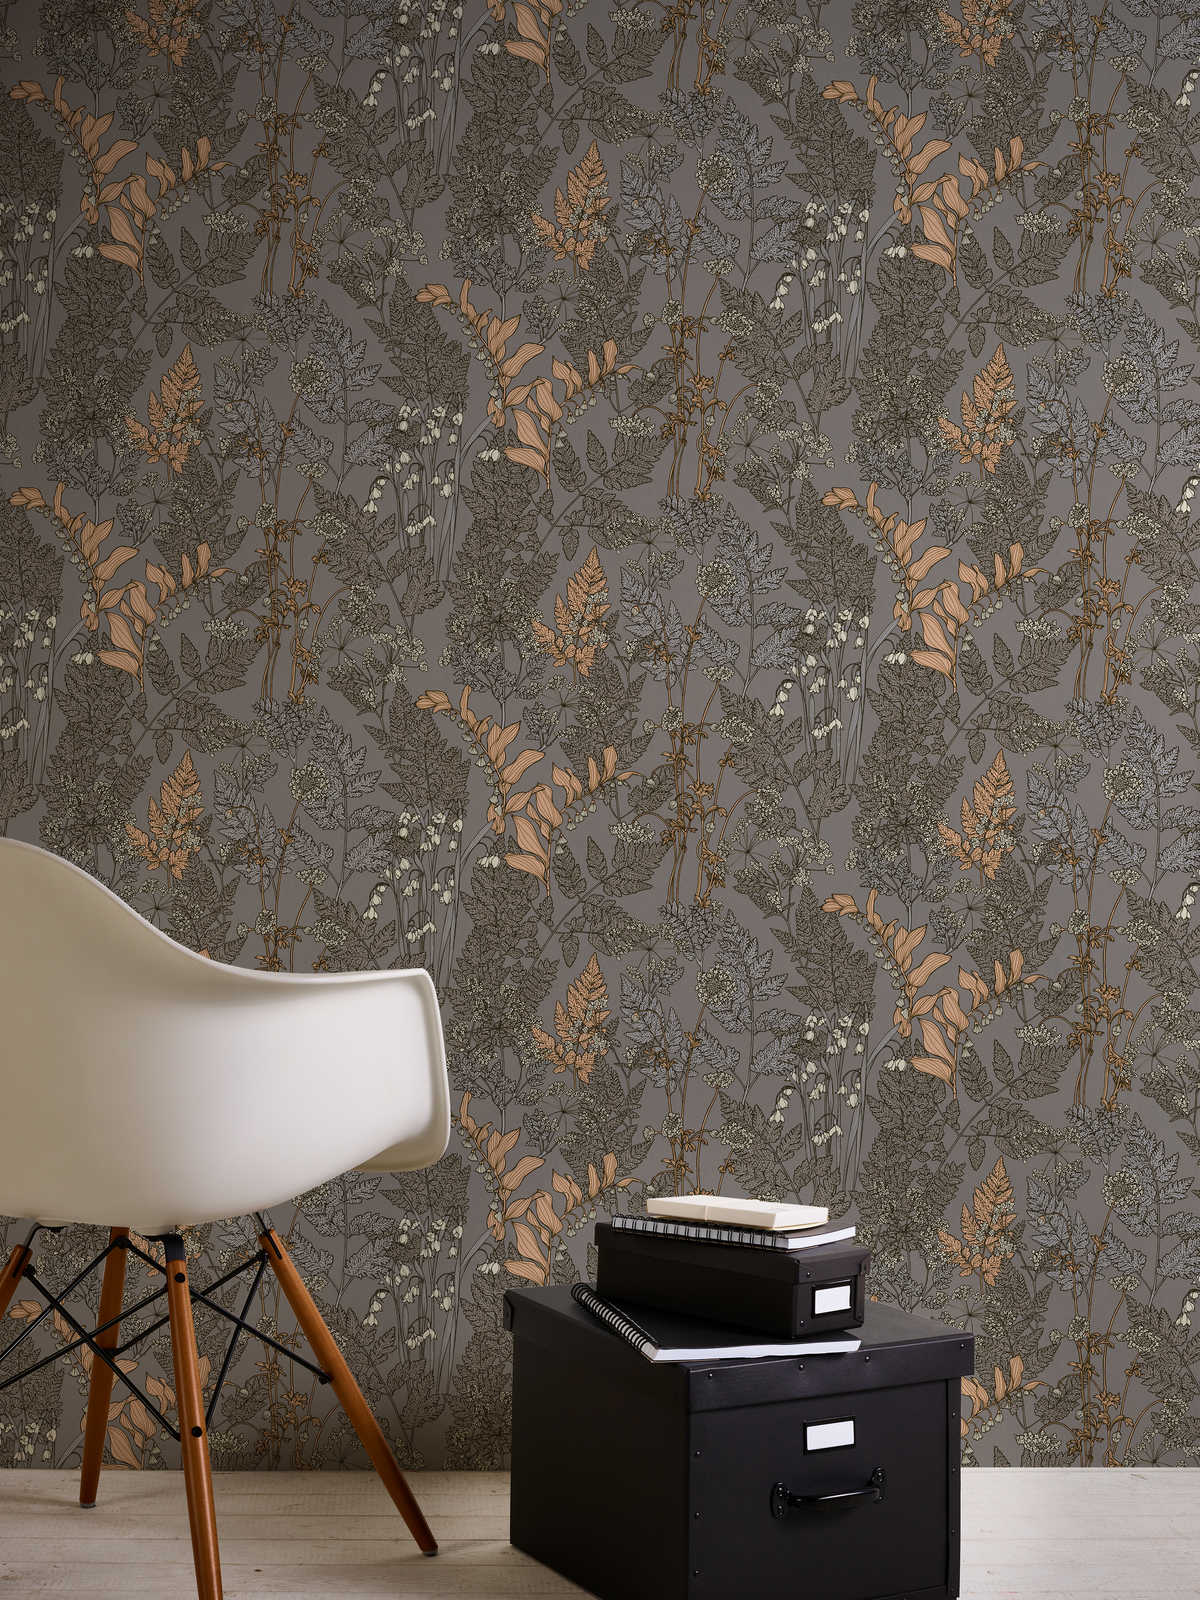             Wallpaper taupe with flowers design in modern style - grey, beige, yellow
        